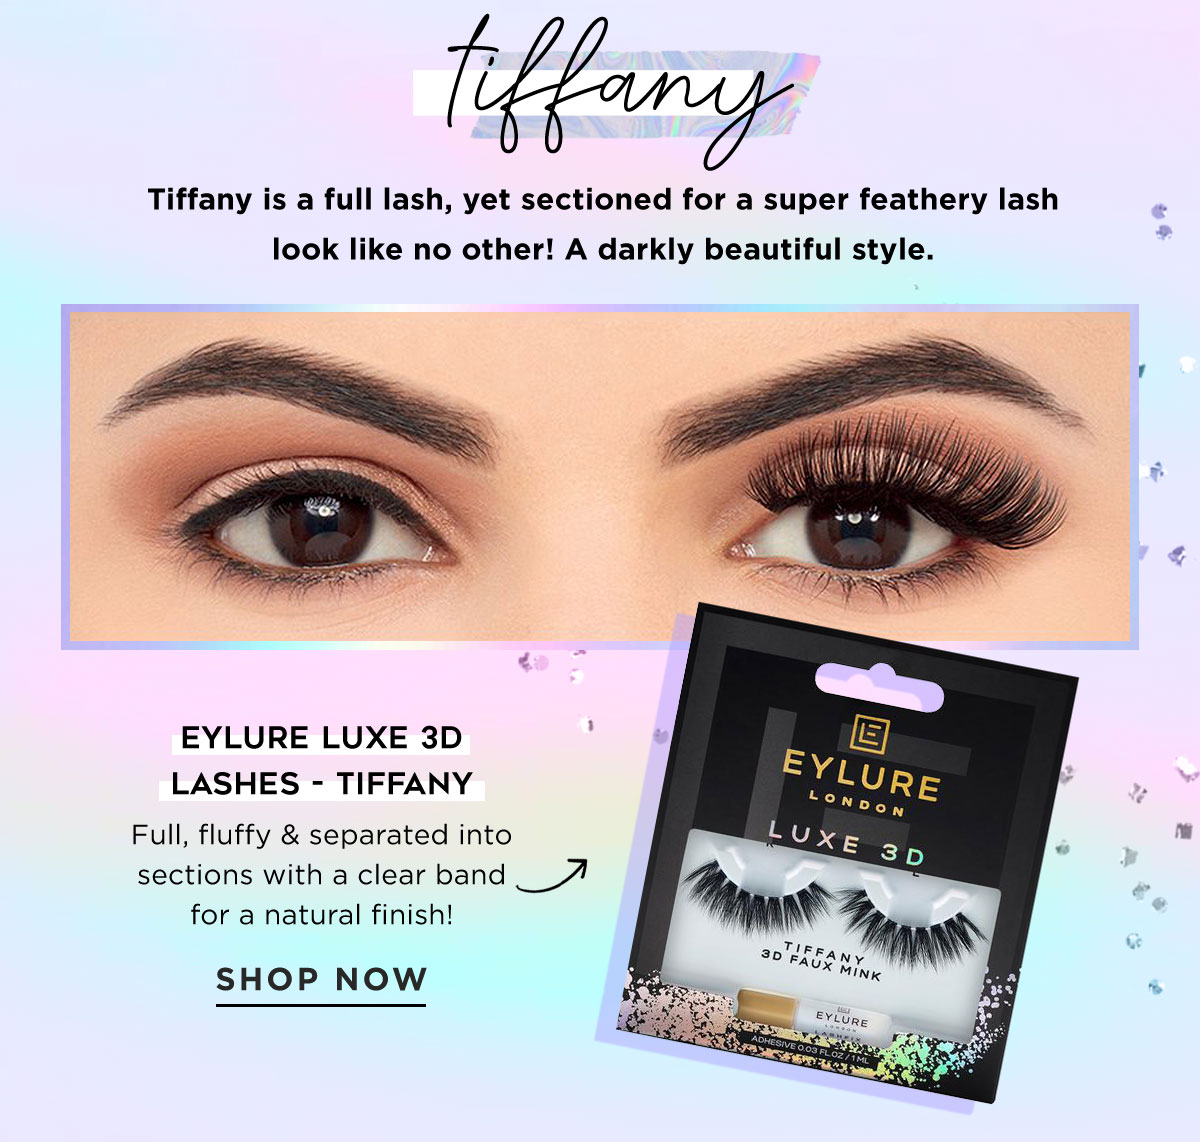 EYLURE LUXE 3D LASHES - TIFFANY